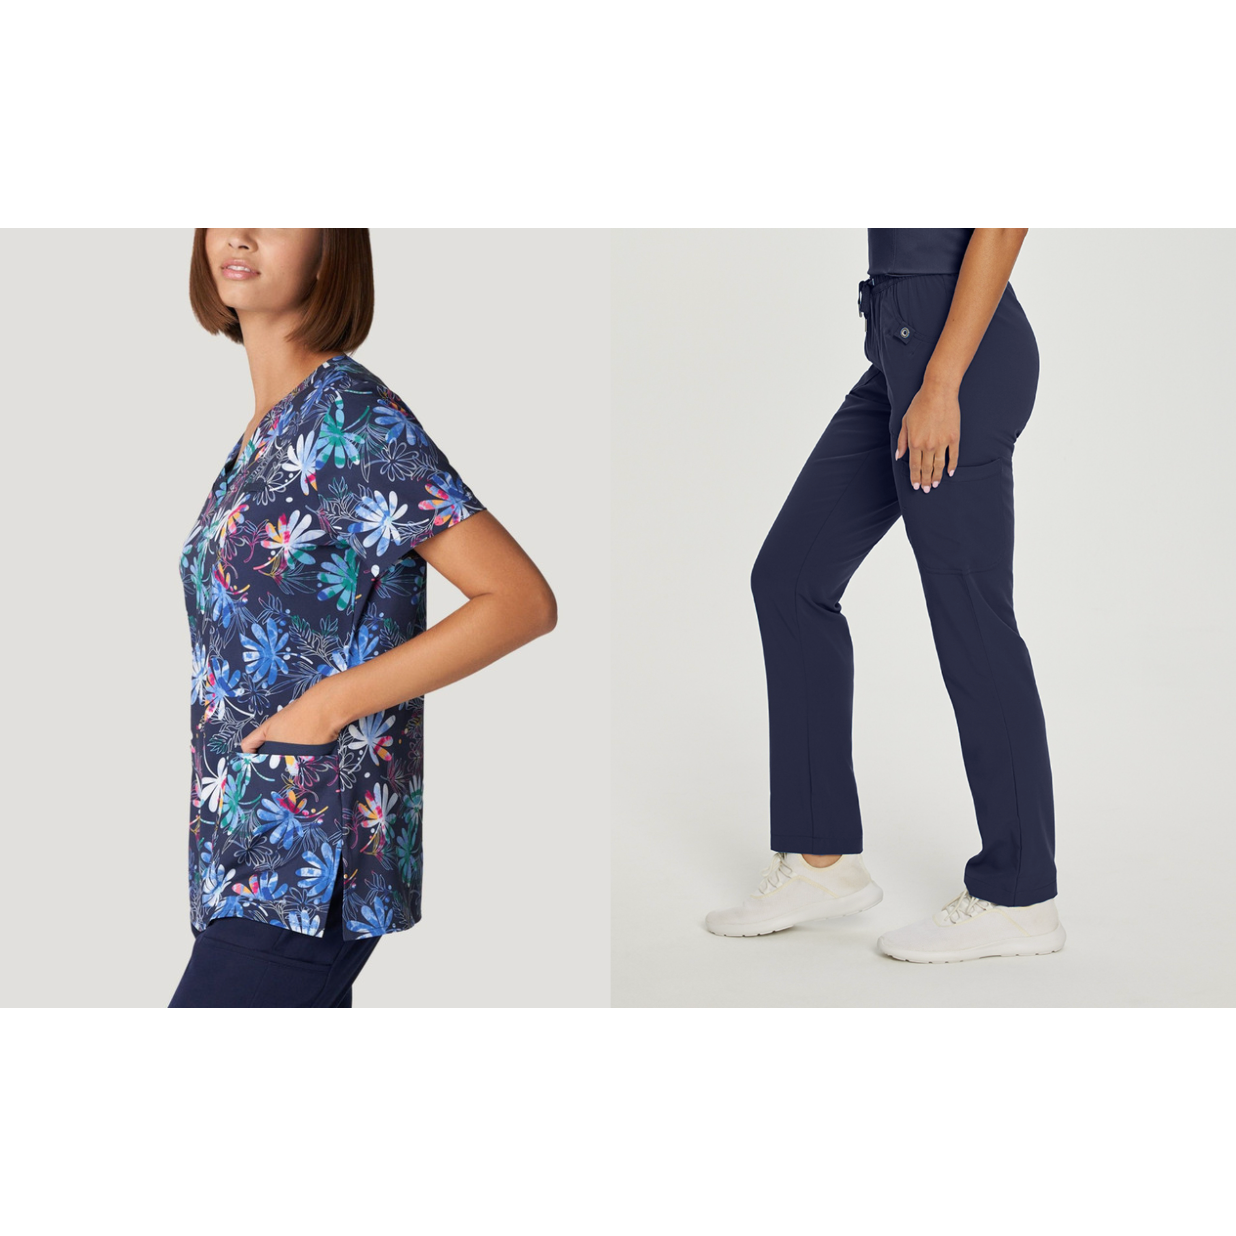 SCRUB SET Printed V-Neck Top and Navy Blue Pants Inseam 31'' 618/309 SALE